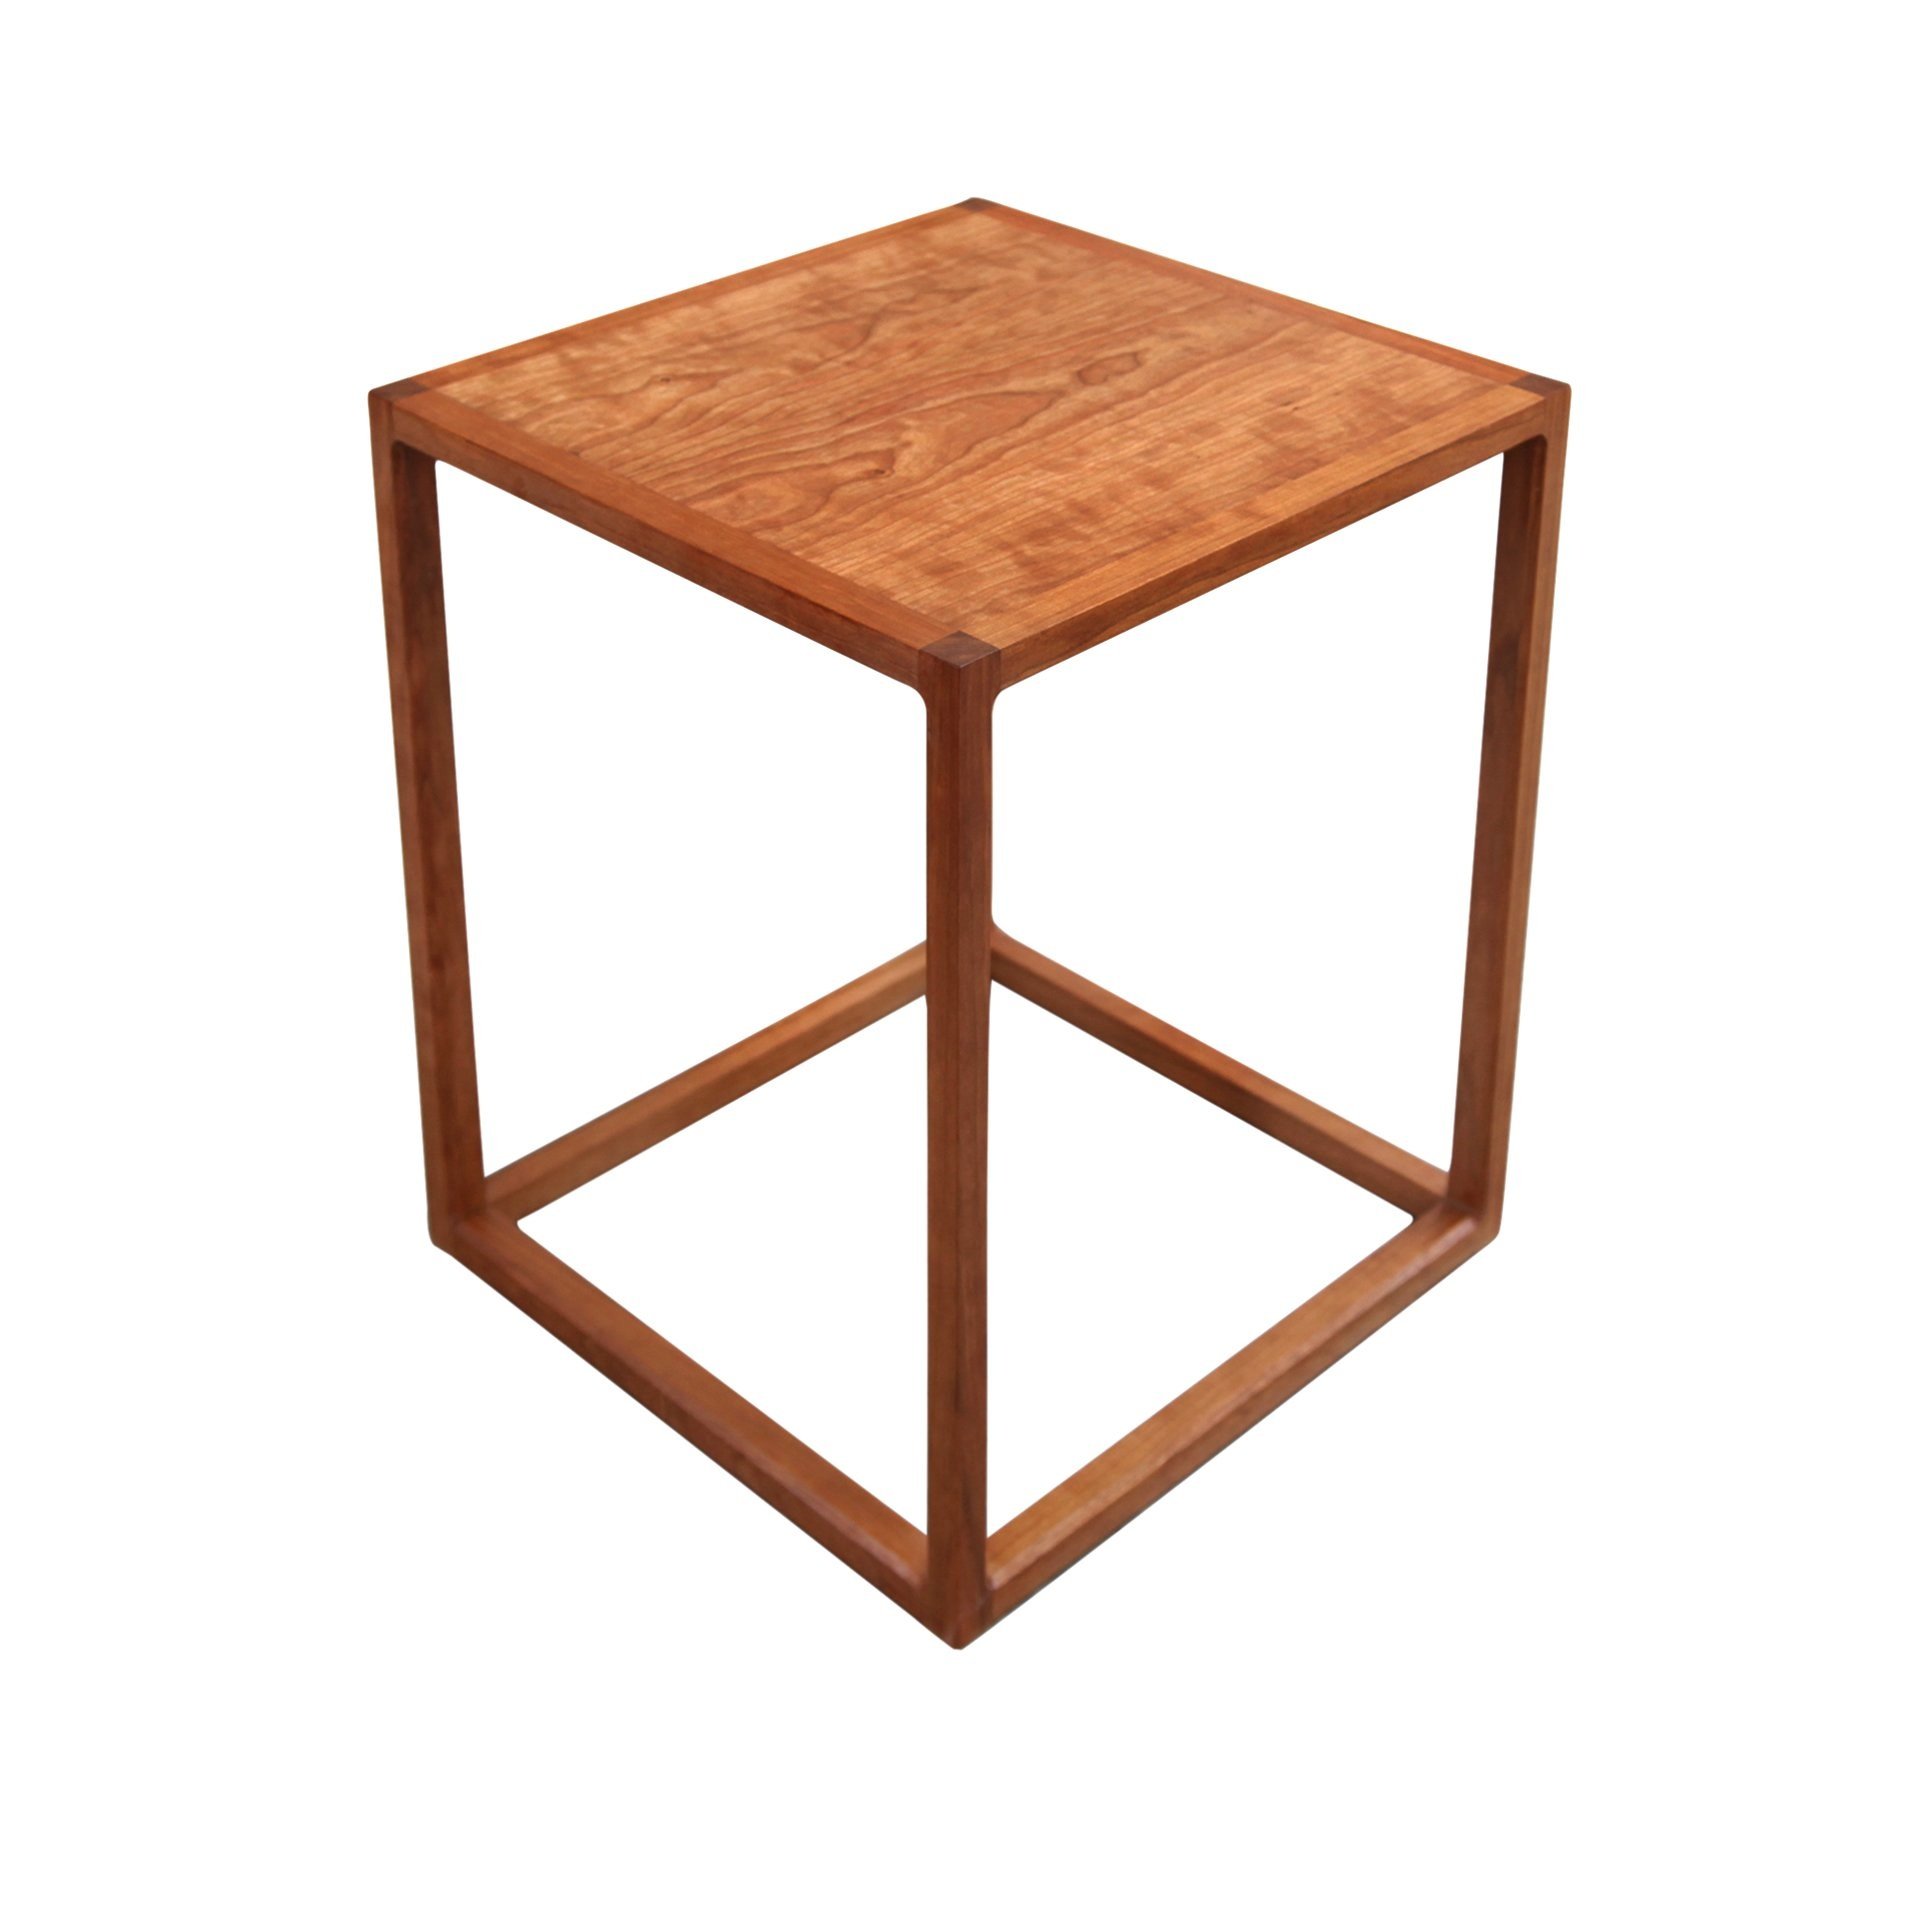 The Nicole Side Table